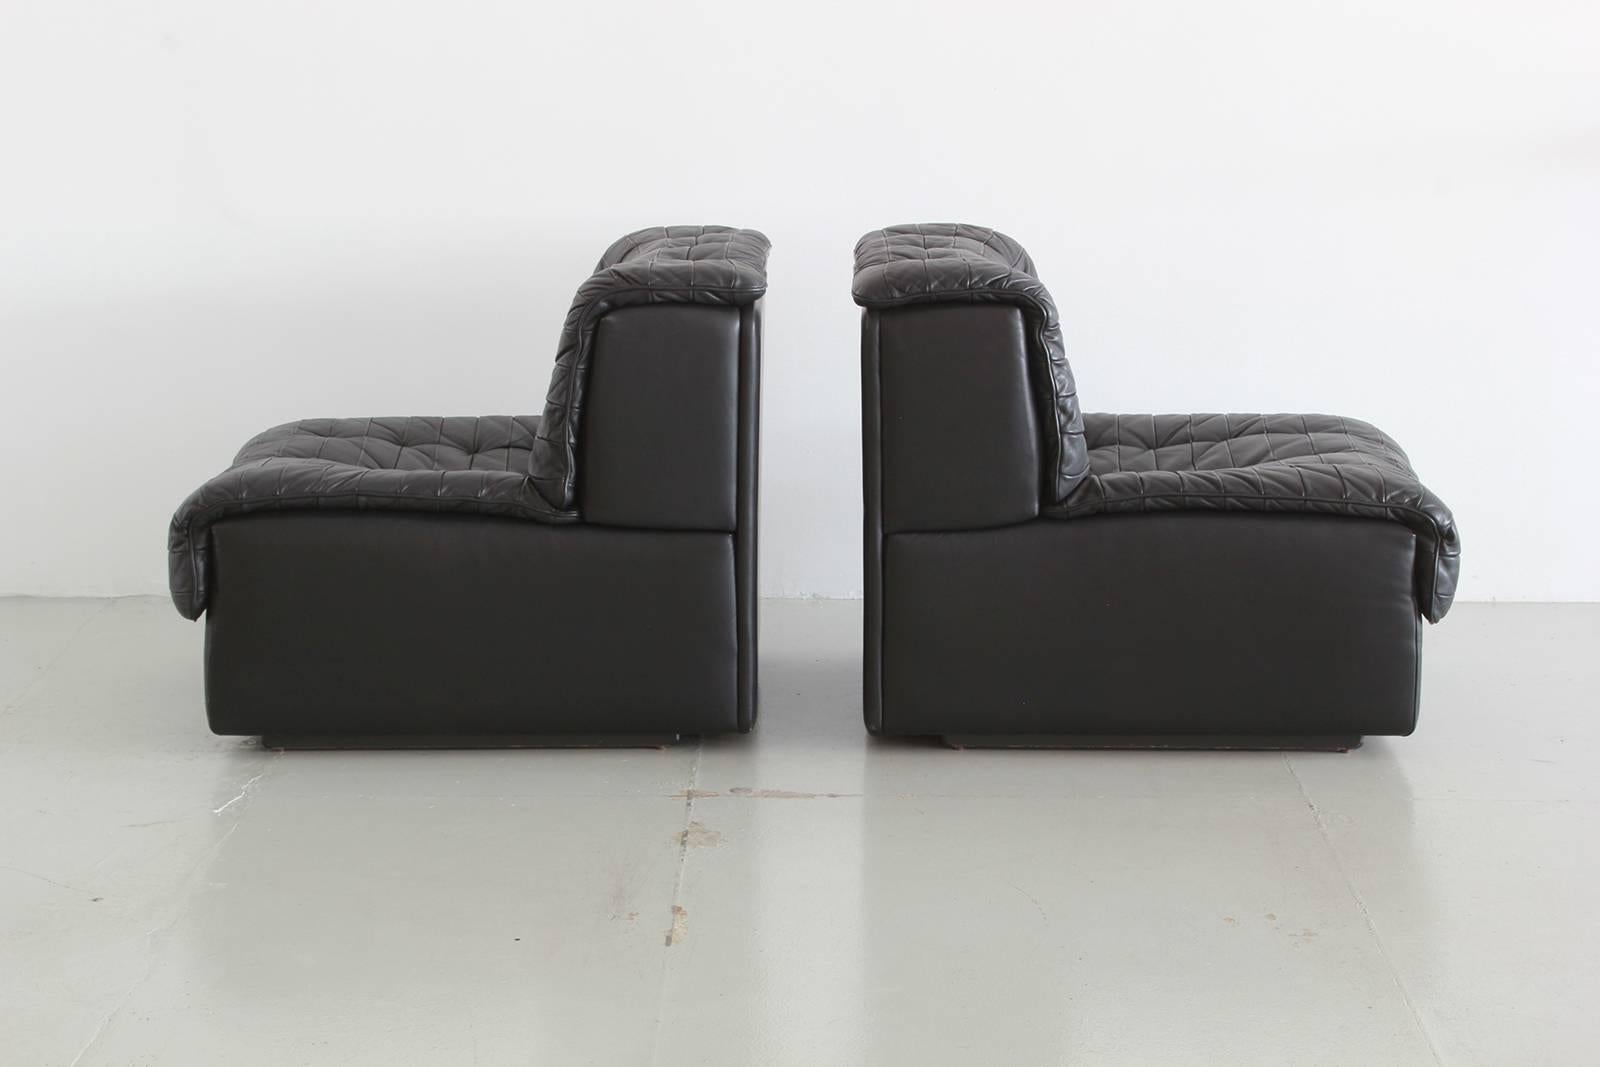 Tufted leather club chairs by De Sede in black leather.